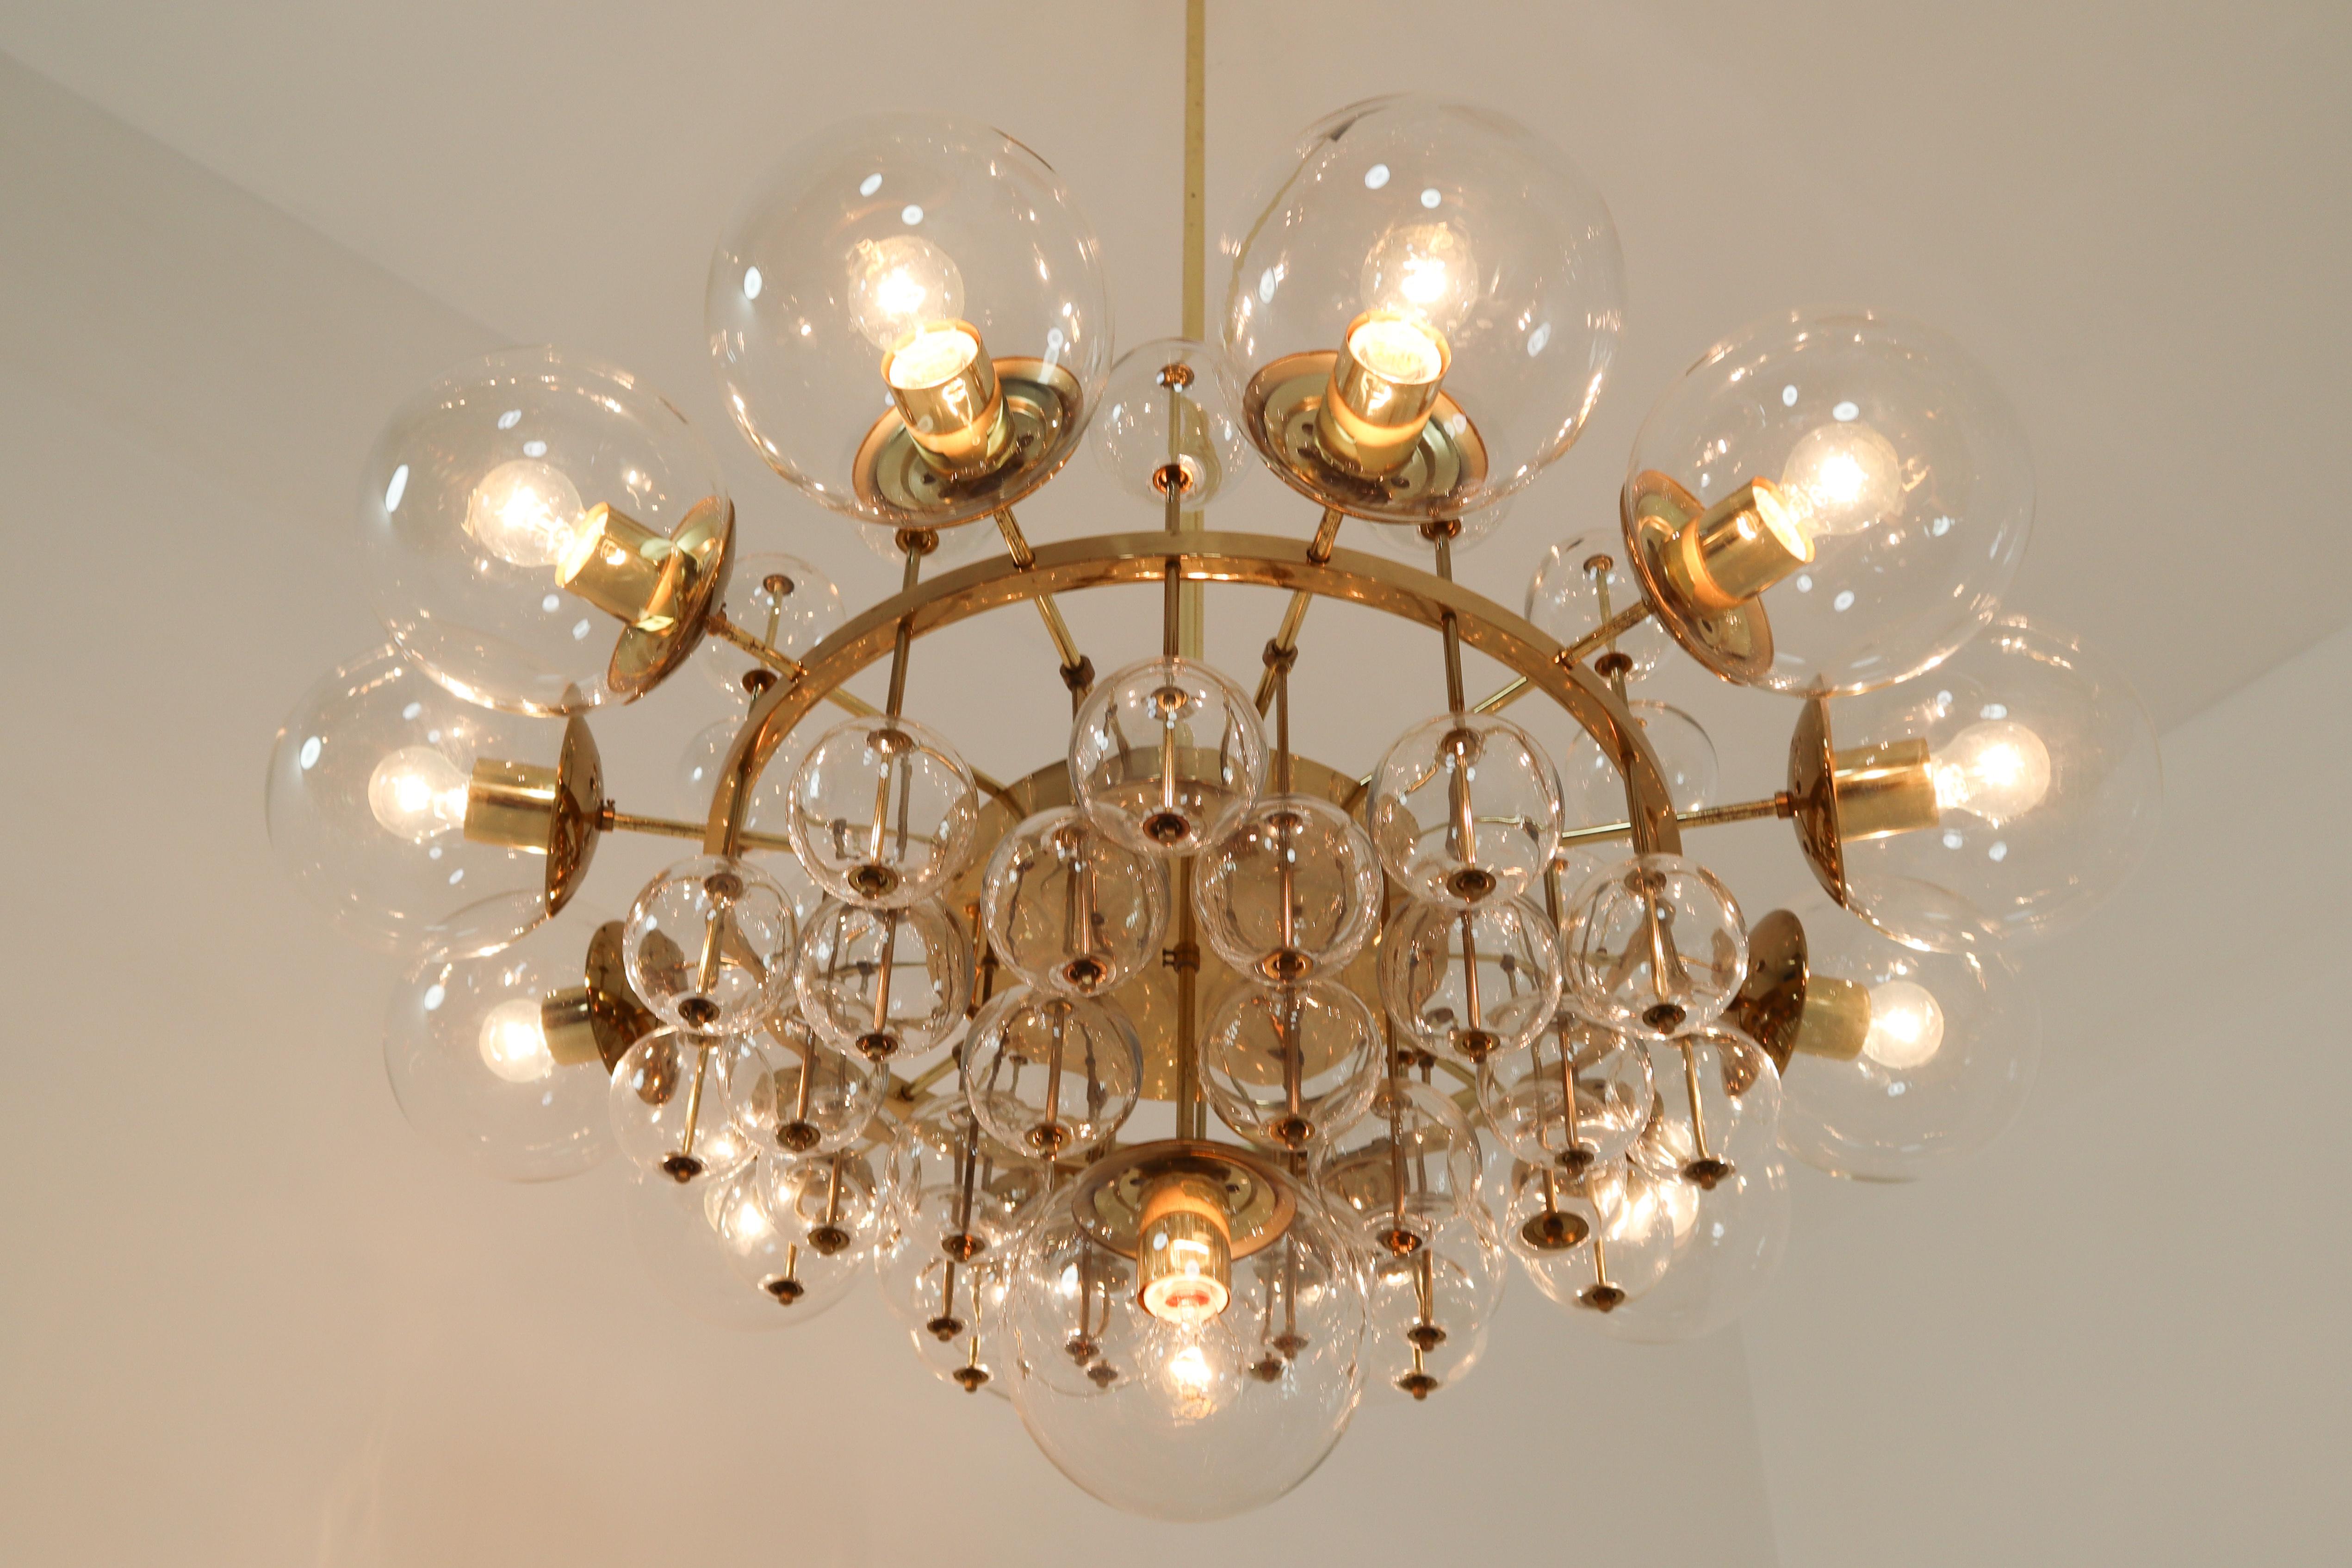 Midcentury Hotel Chandelier with Brass Fixture and Hand-Blowed Glass Globes 2